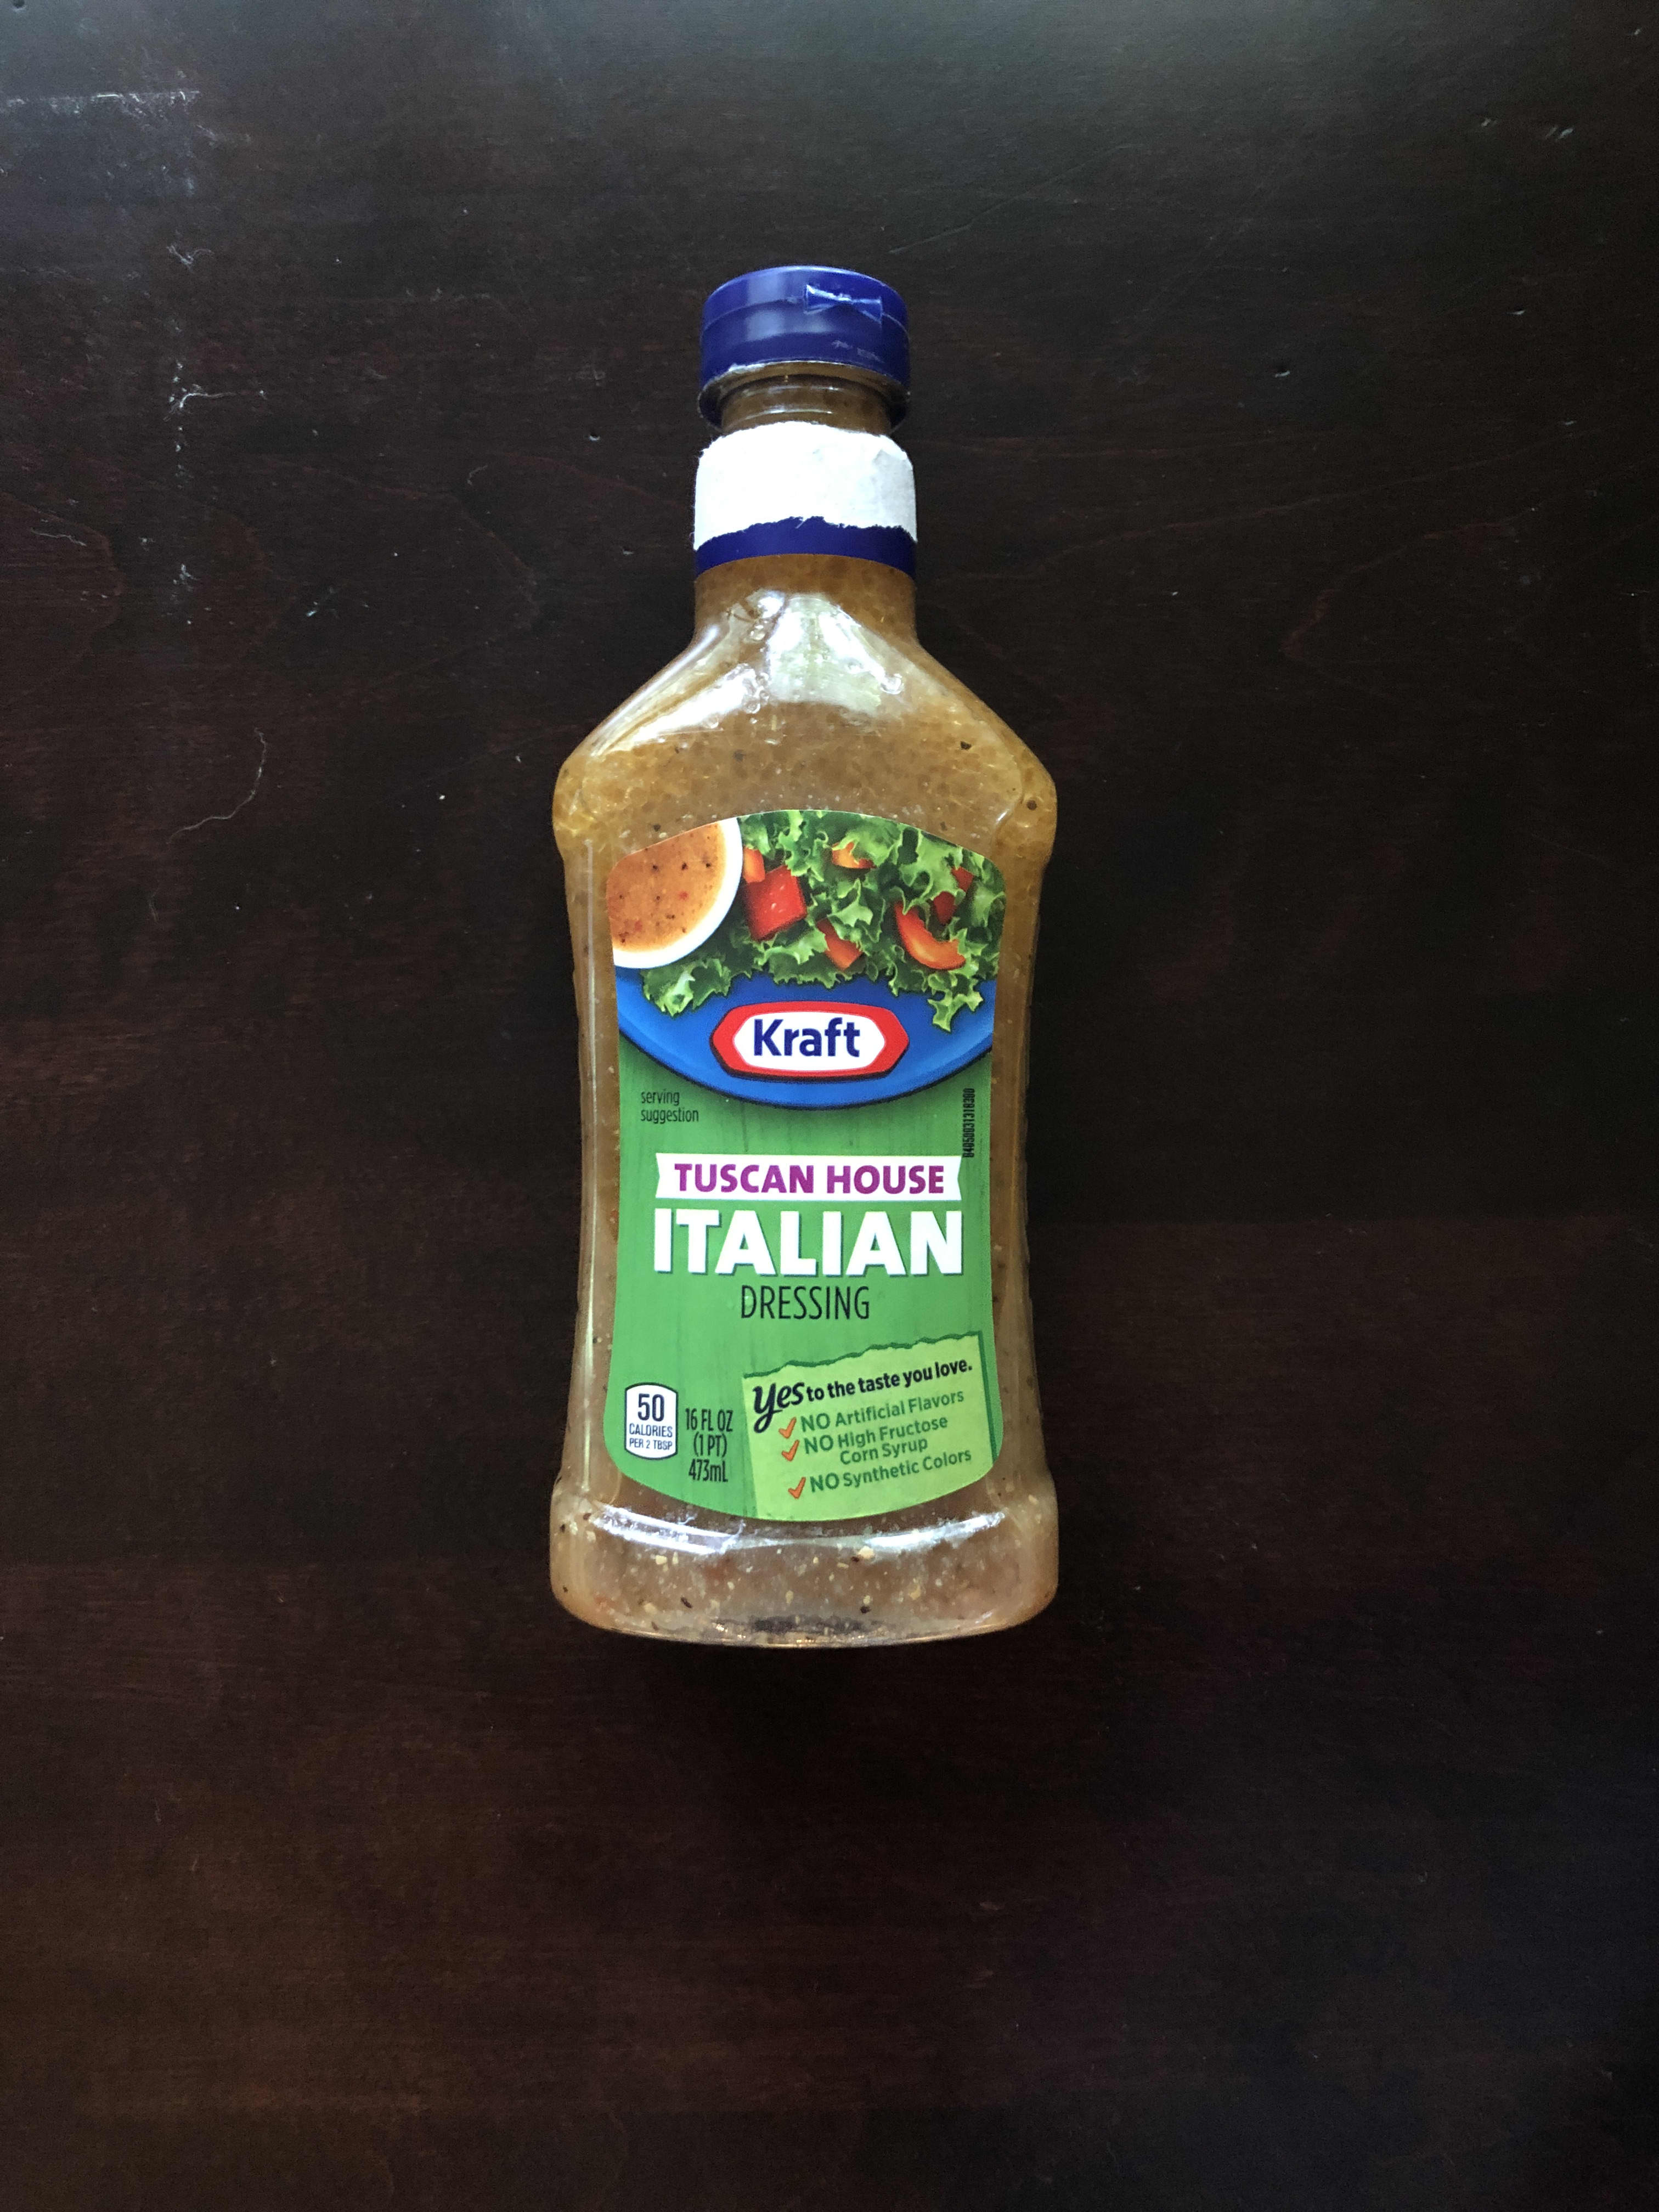 We Tried 10 Brands: These Are the Best Italian Dressing Options